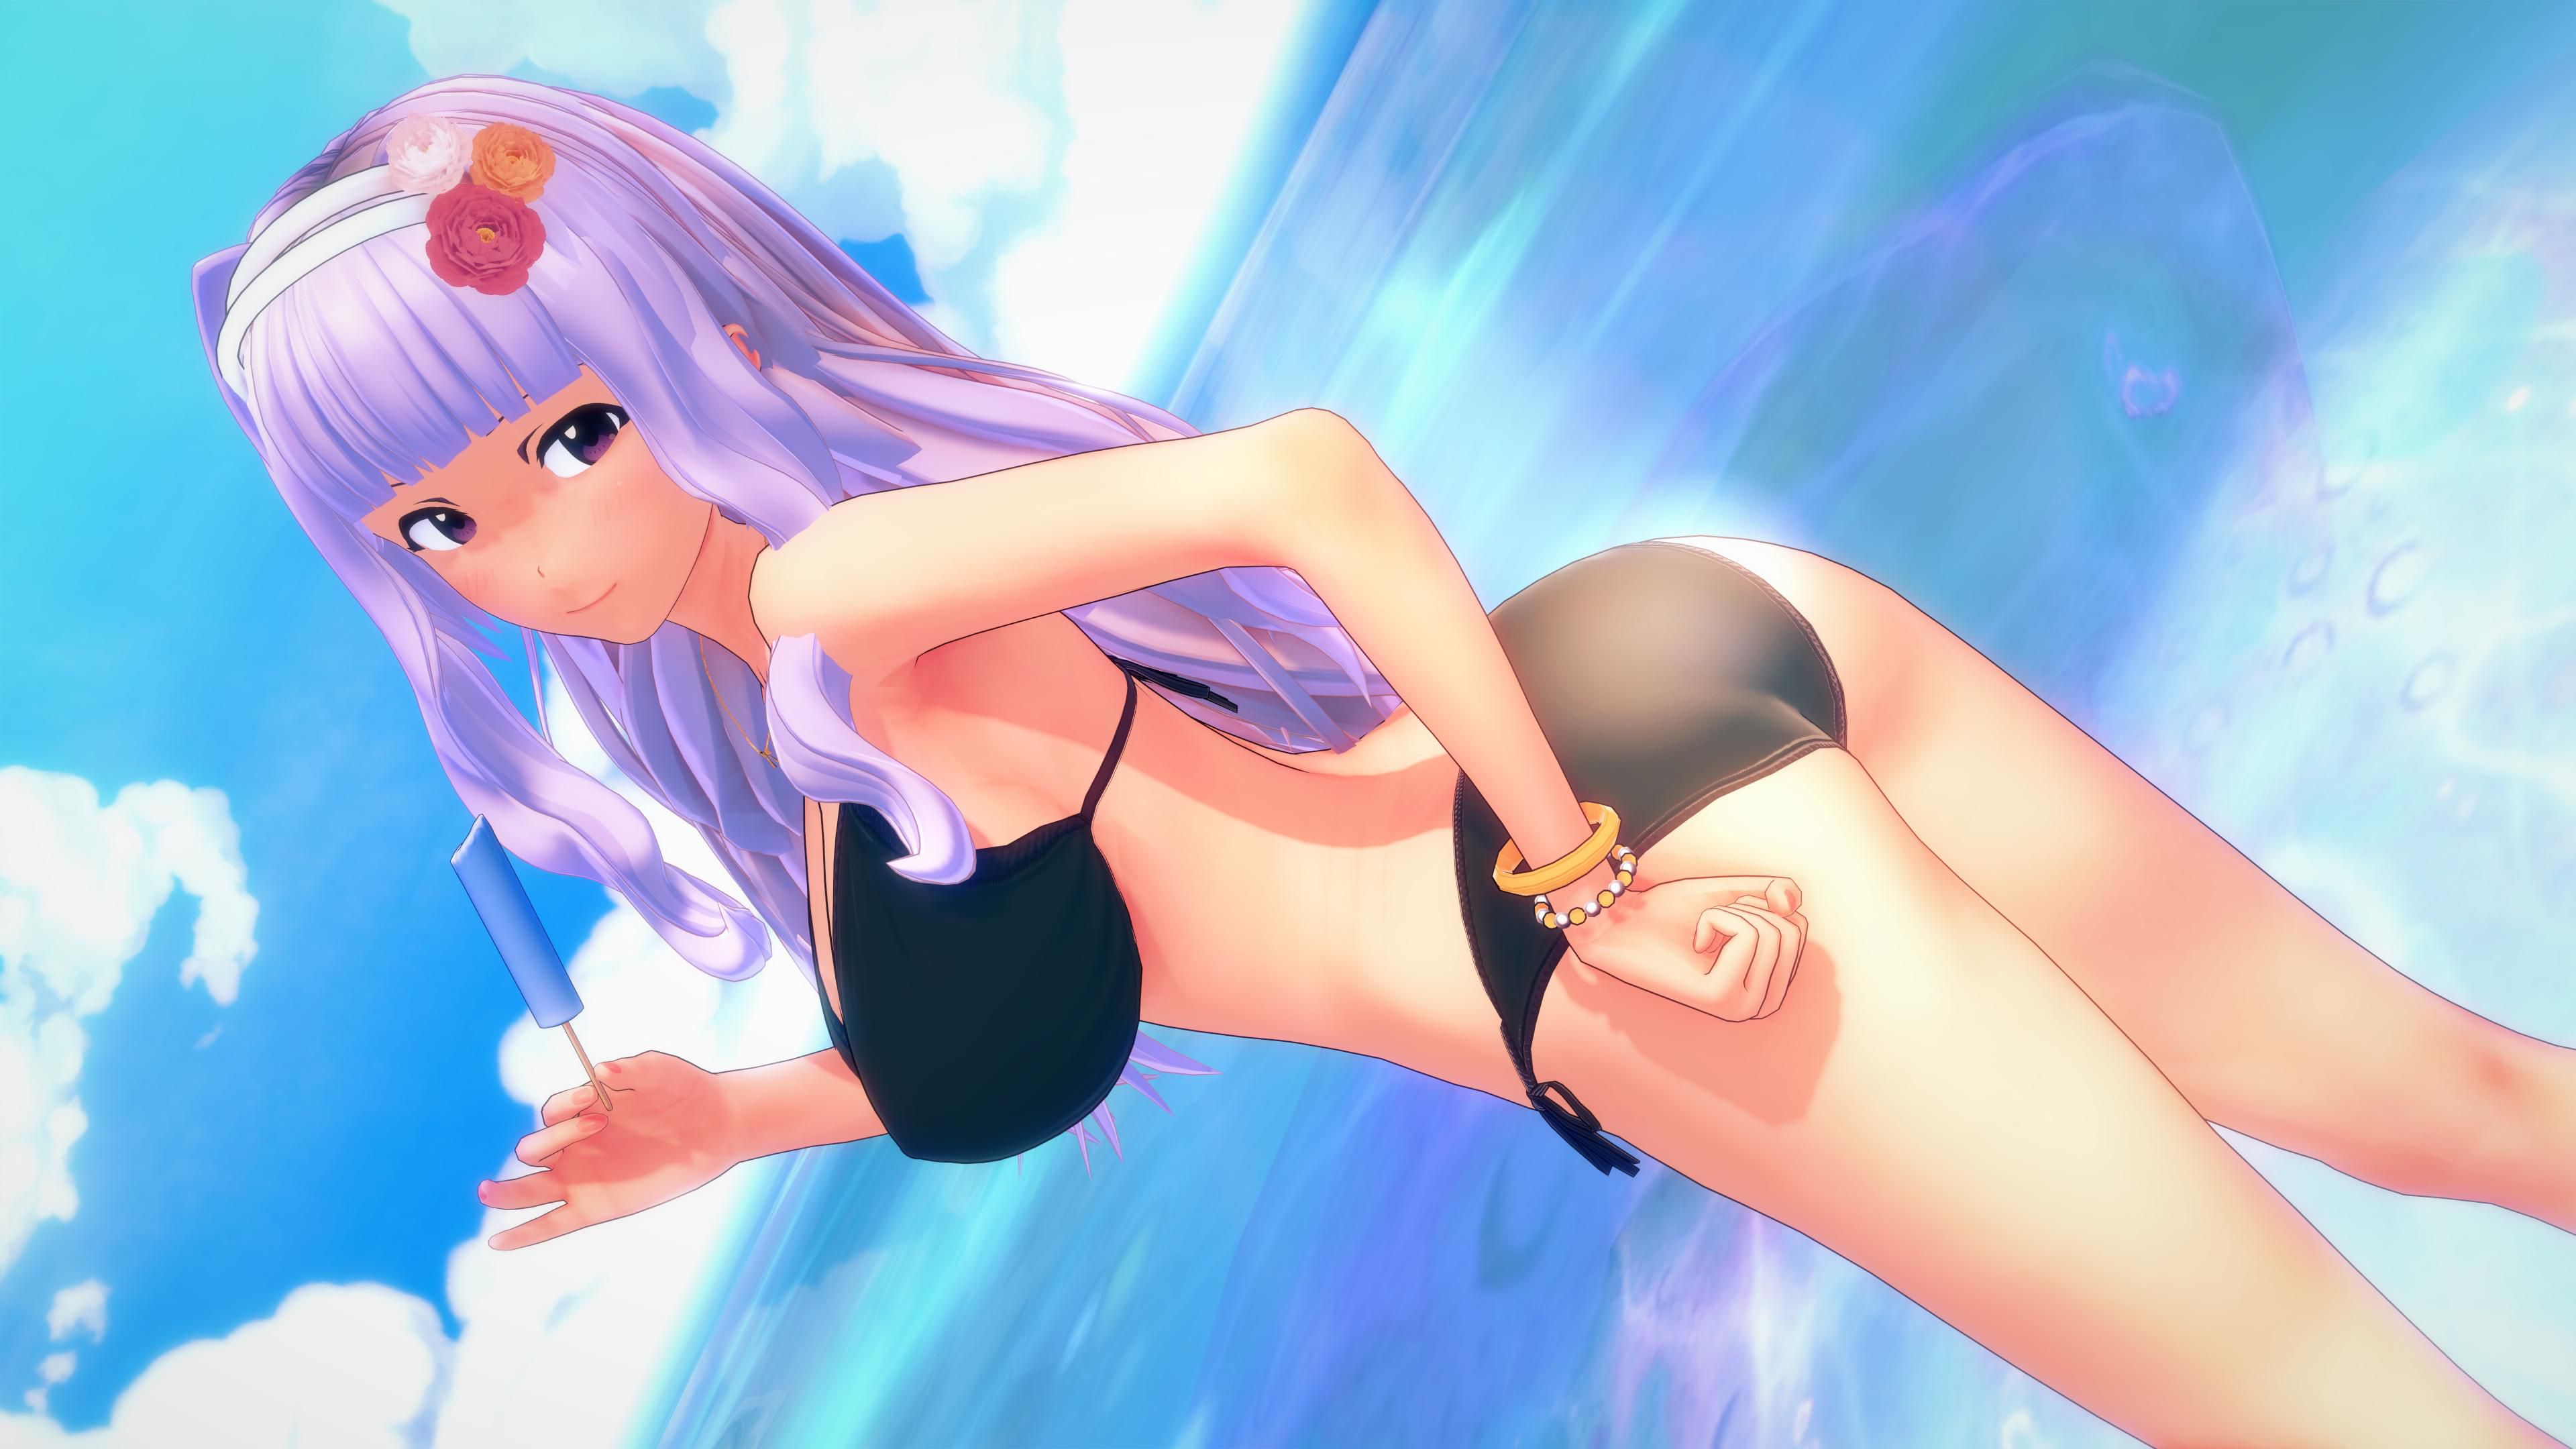 【Image】Eyemouth character made with Eroge is too wwwwww 3